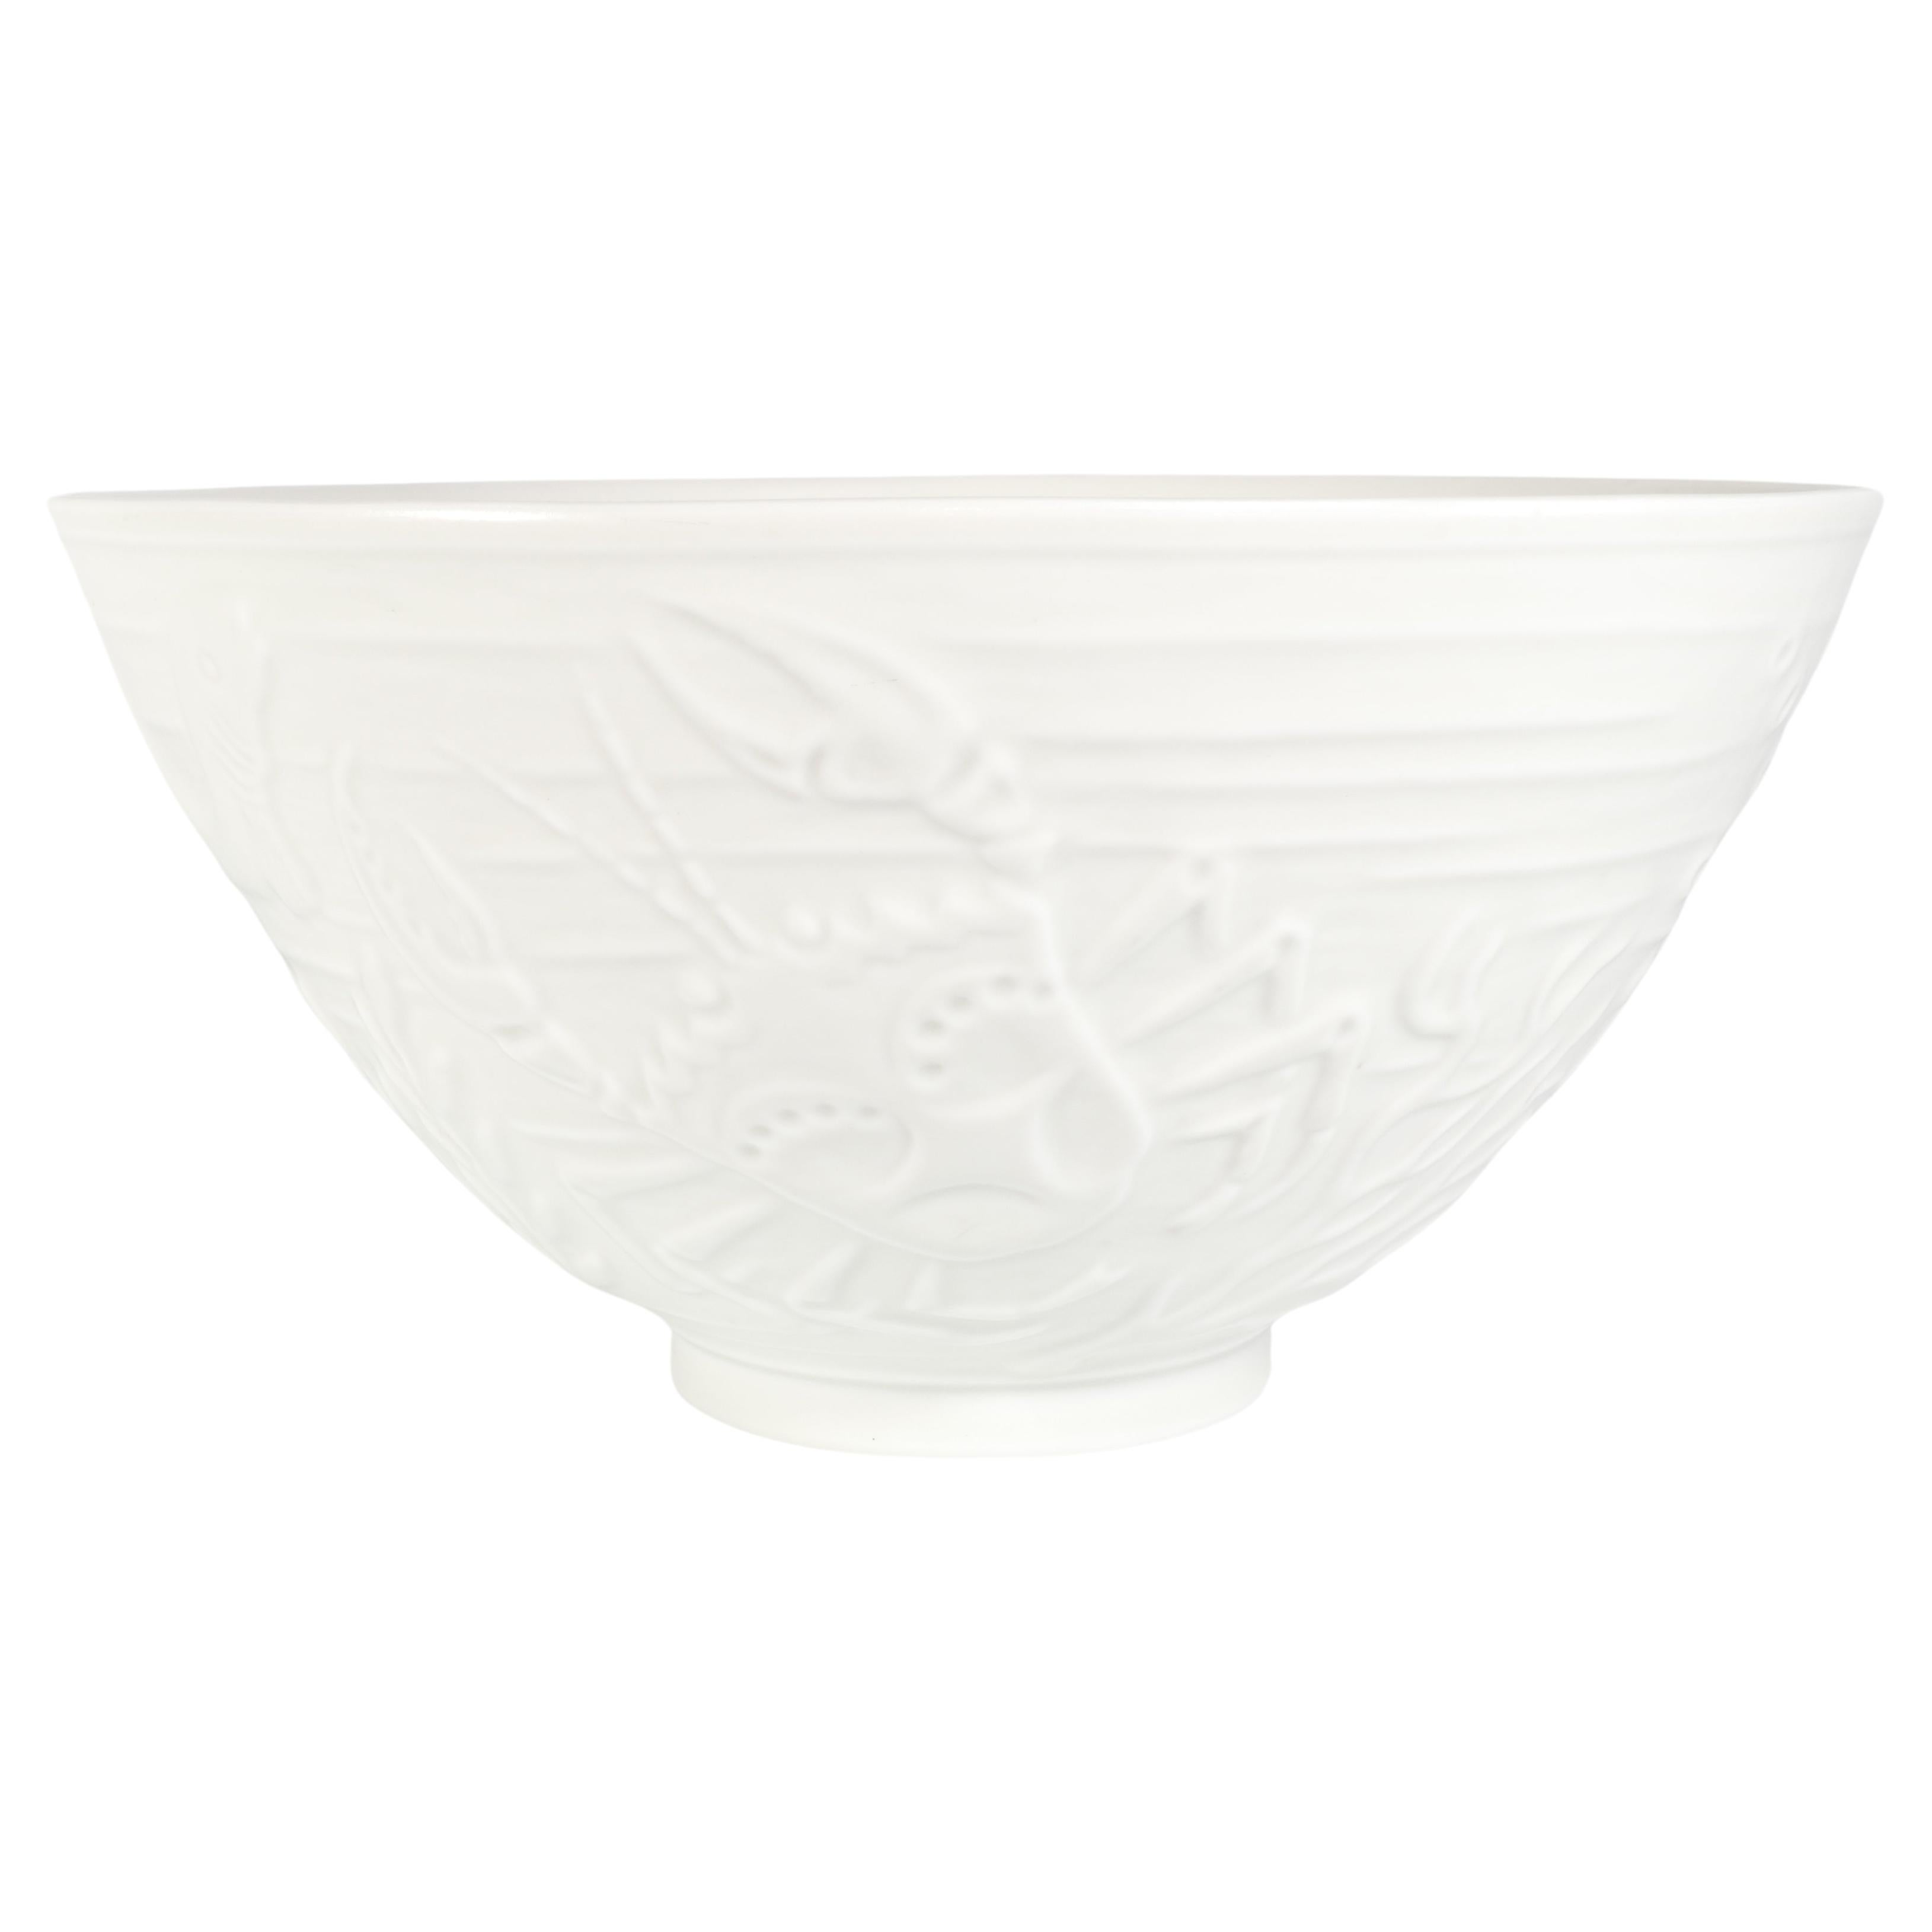 Swedish Grace White Porcelain Sea Themed  Bowl by Gunnar Nylund for ALP, 1940's For Sale